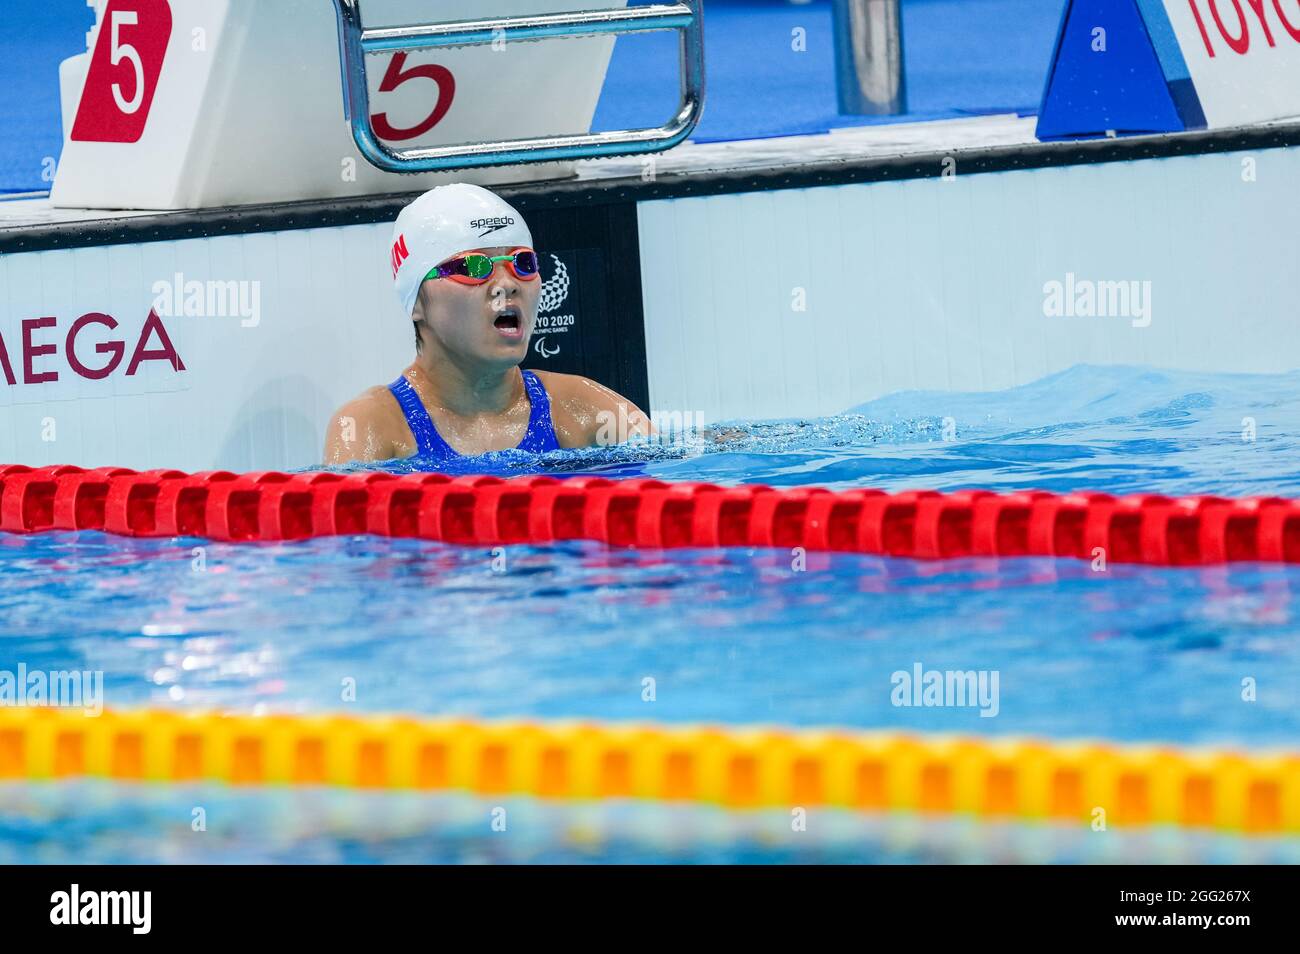 Tokyo, Japan. 28th Aug, 2021. Liu Daomin of China reacts after the women's 100m breaststroke SB6 final of swimming event at the Tokyo 2020 Paralympic Games in Tokyo, Japan, Aug. 28, 2021. Credit: Zhu Wei/Xinhua/Alamy Live News Stock Photo